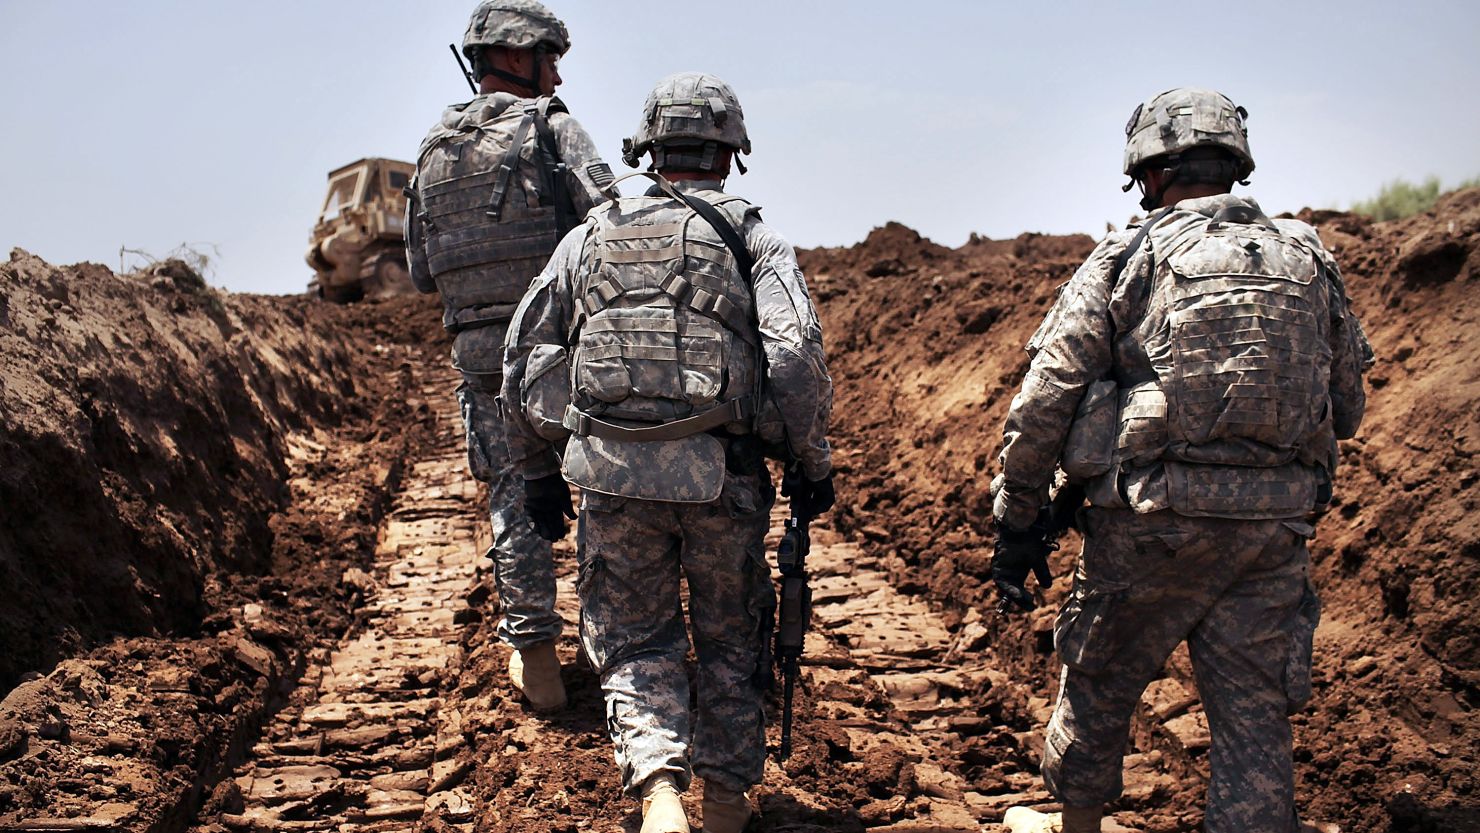 U.S. soldiers patrol a a newly dug ditch in Iraq. The country's leaders said U.S. soldiers won't receive Iraqi immunity after 2011.